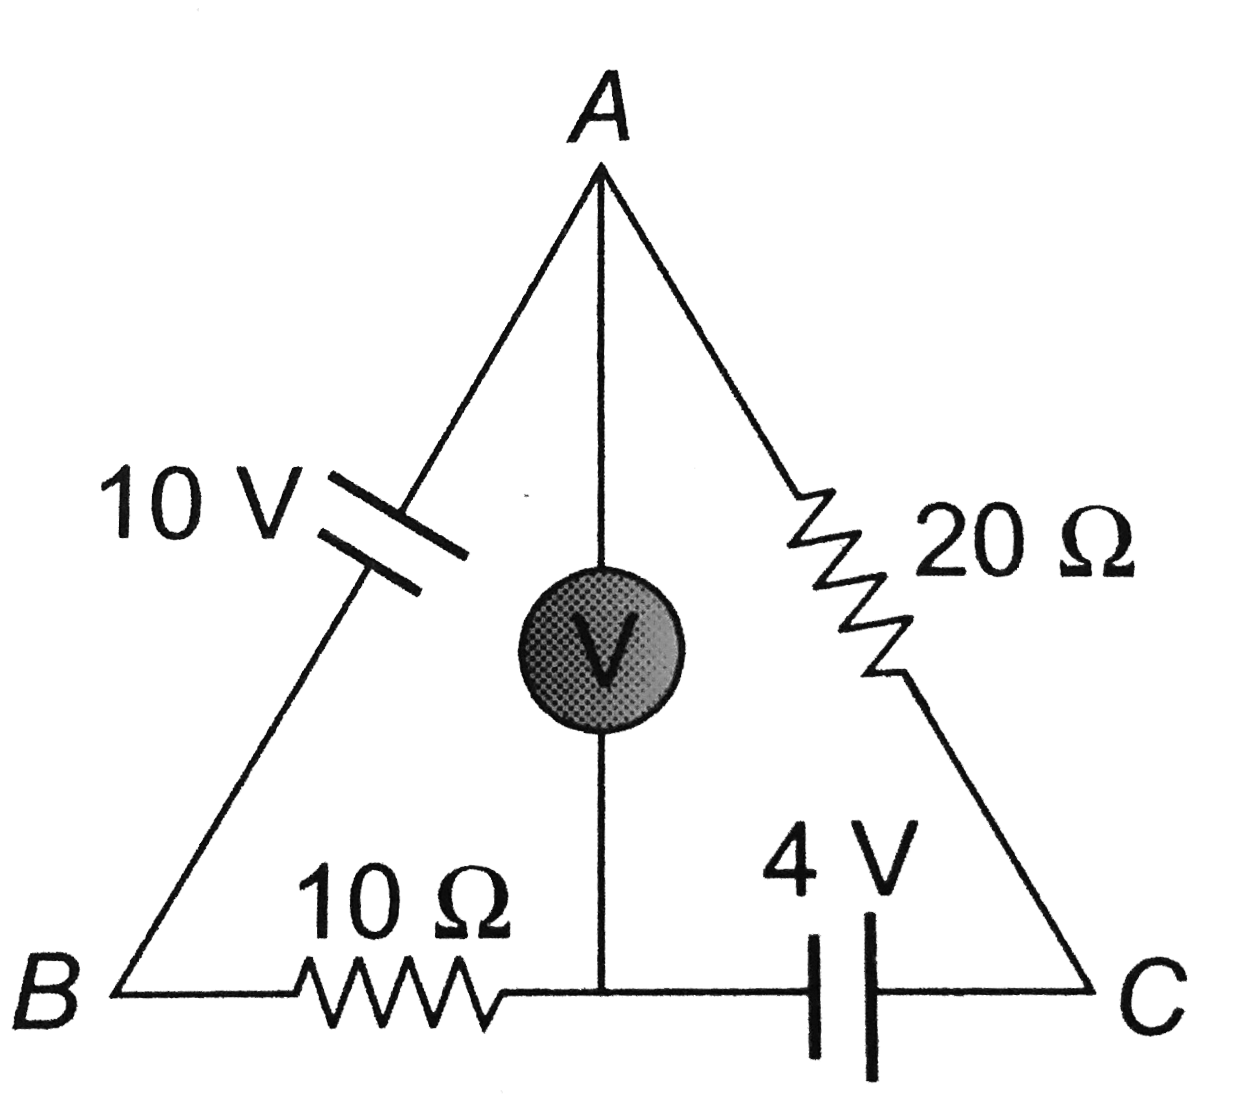 The reading of the ideal voltmeter in the adjoining diagram will be